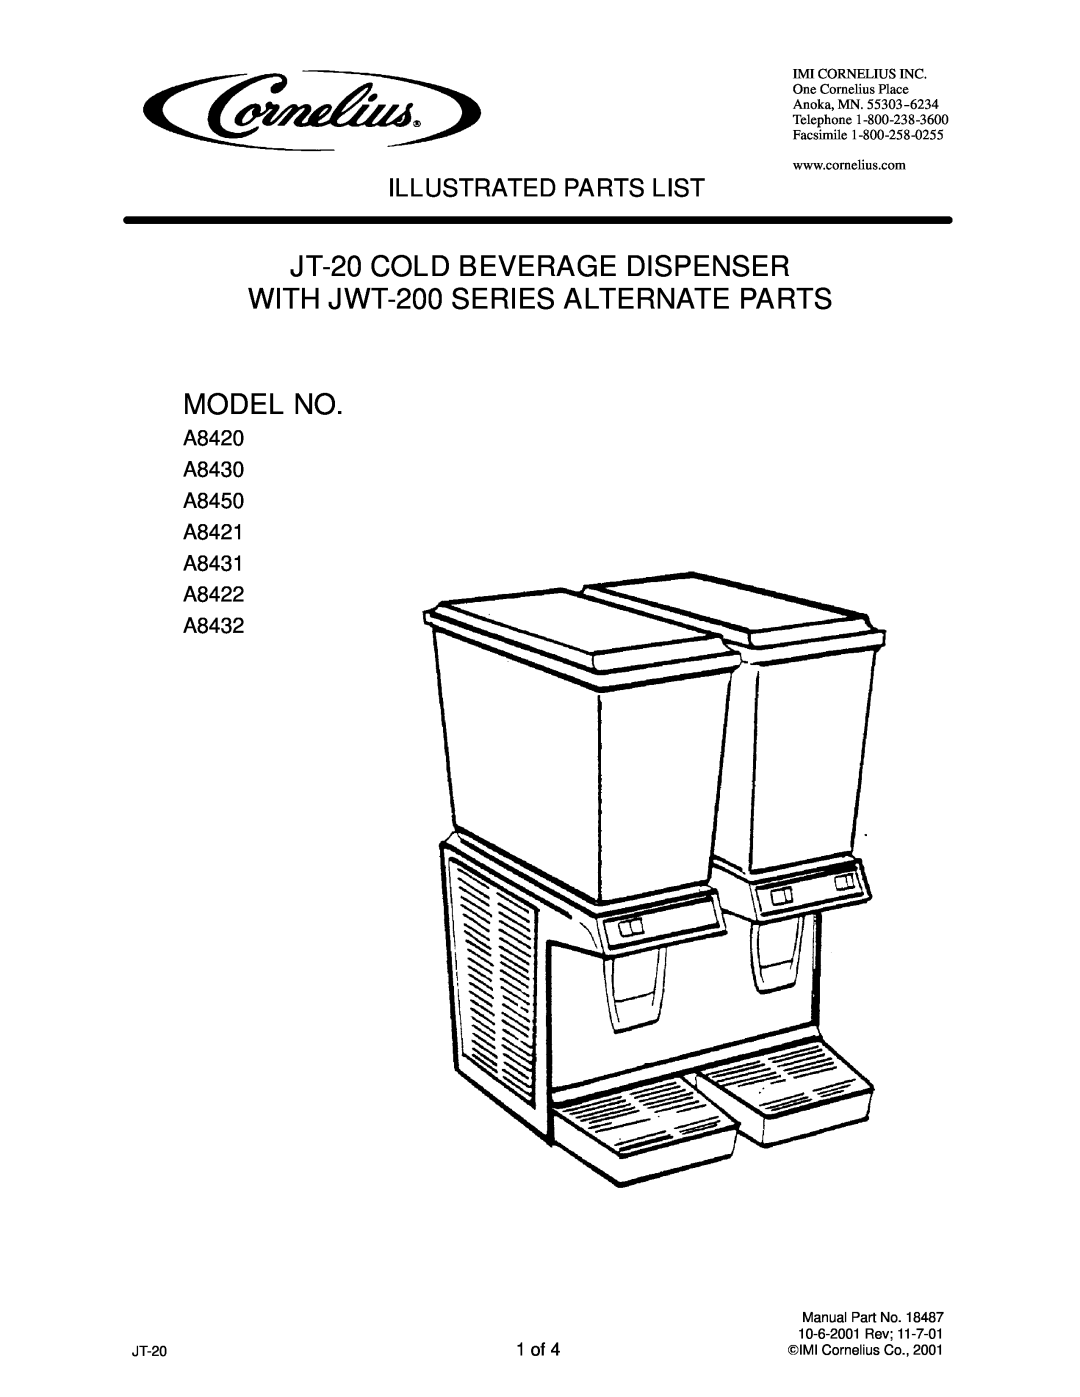 Panasonic manual JT-20COLD BEVERAGE DISPENSER, WITH JWT-200SERIES ALTERNATE PARTS MODEL NO, Illustrated Parts List 